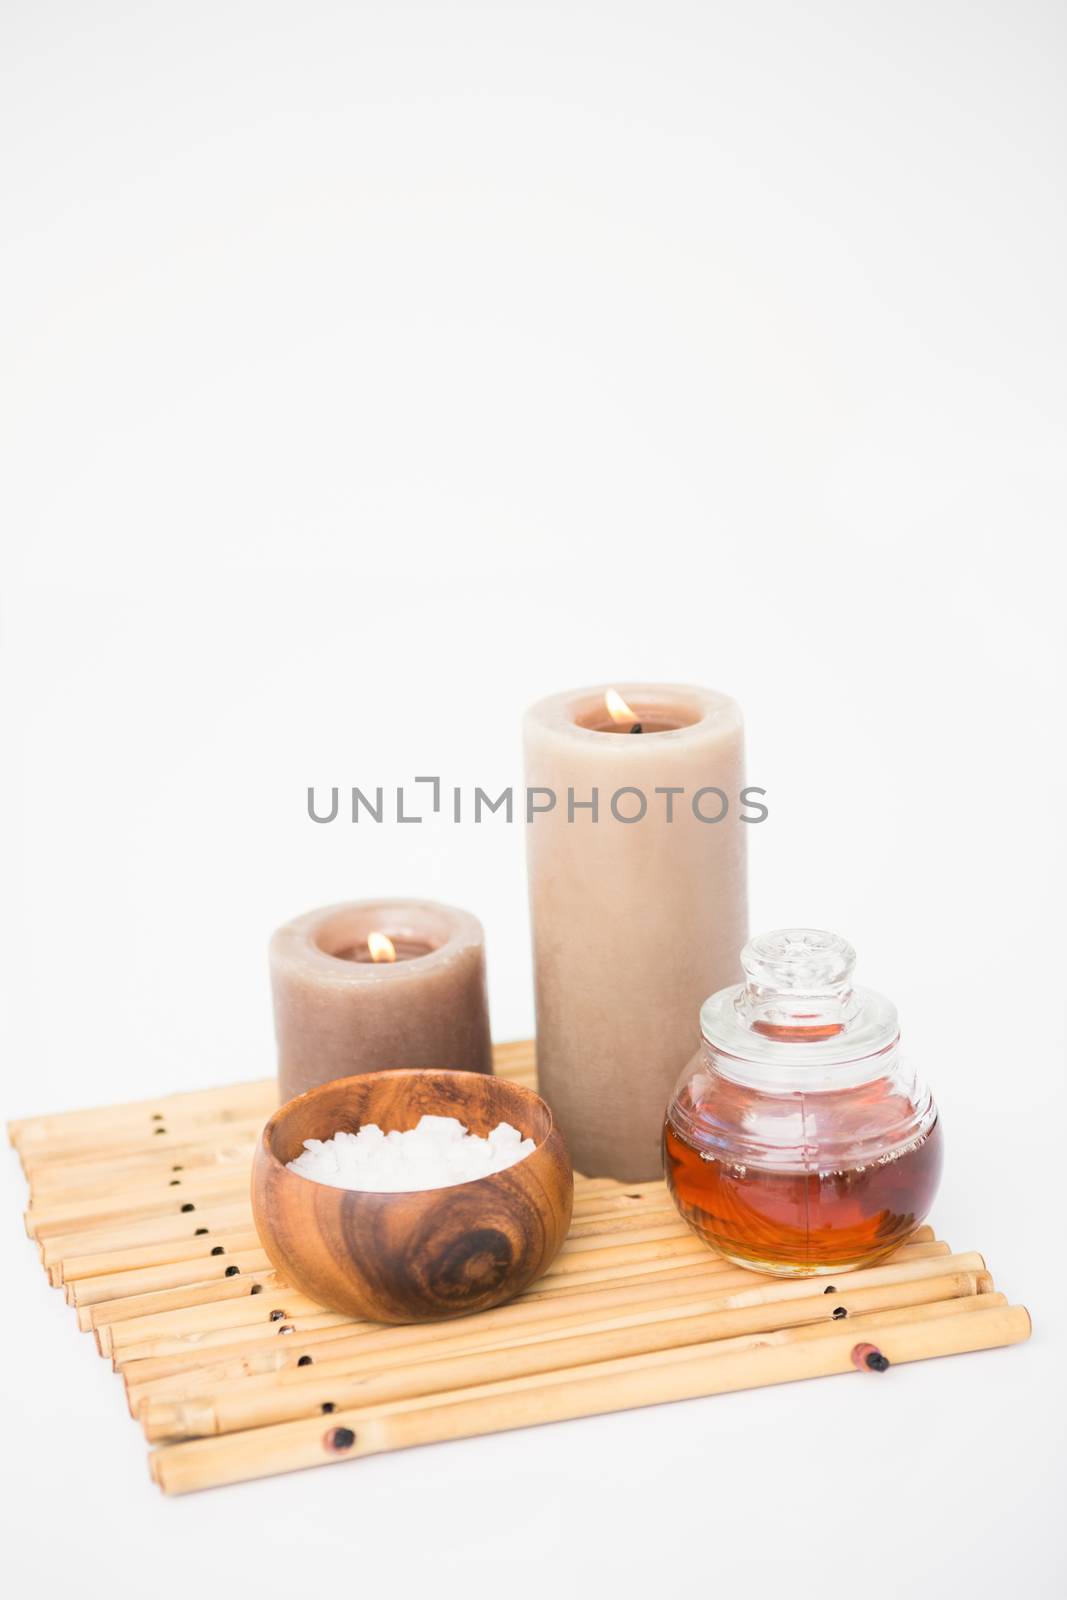 Perfumed candles and beauty products by Wavebreakmedia